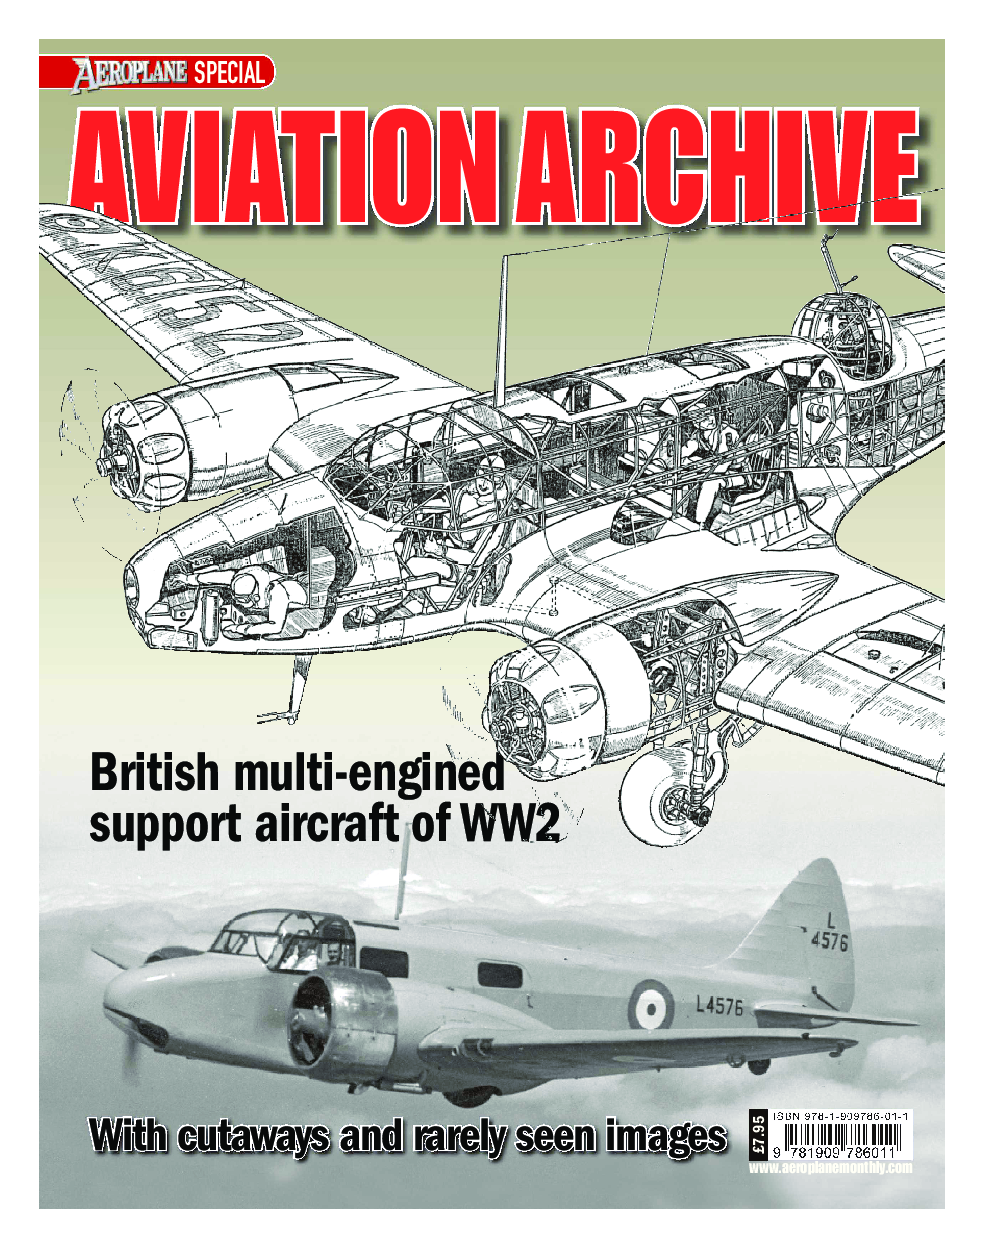 Aircraft support aircraft. Aircraft illustrated. Aviation Archive. Support aircraft. Aeroplane Archive.